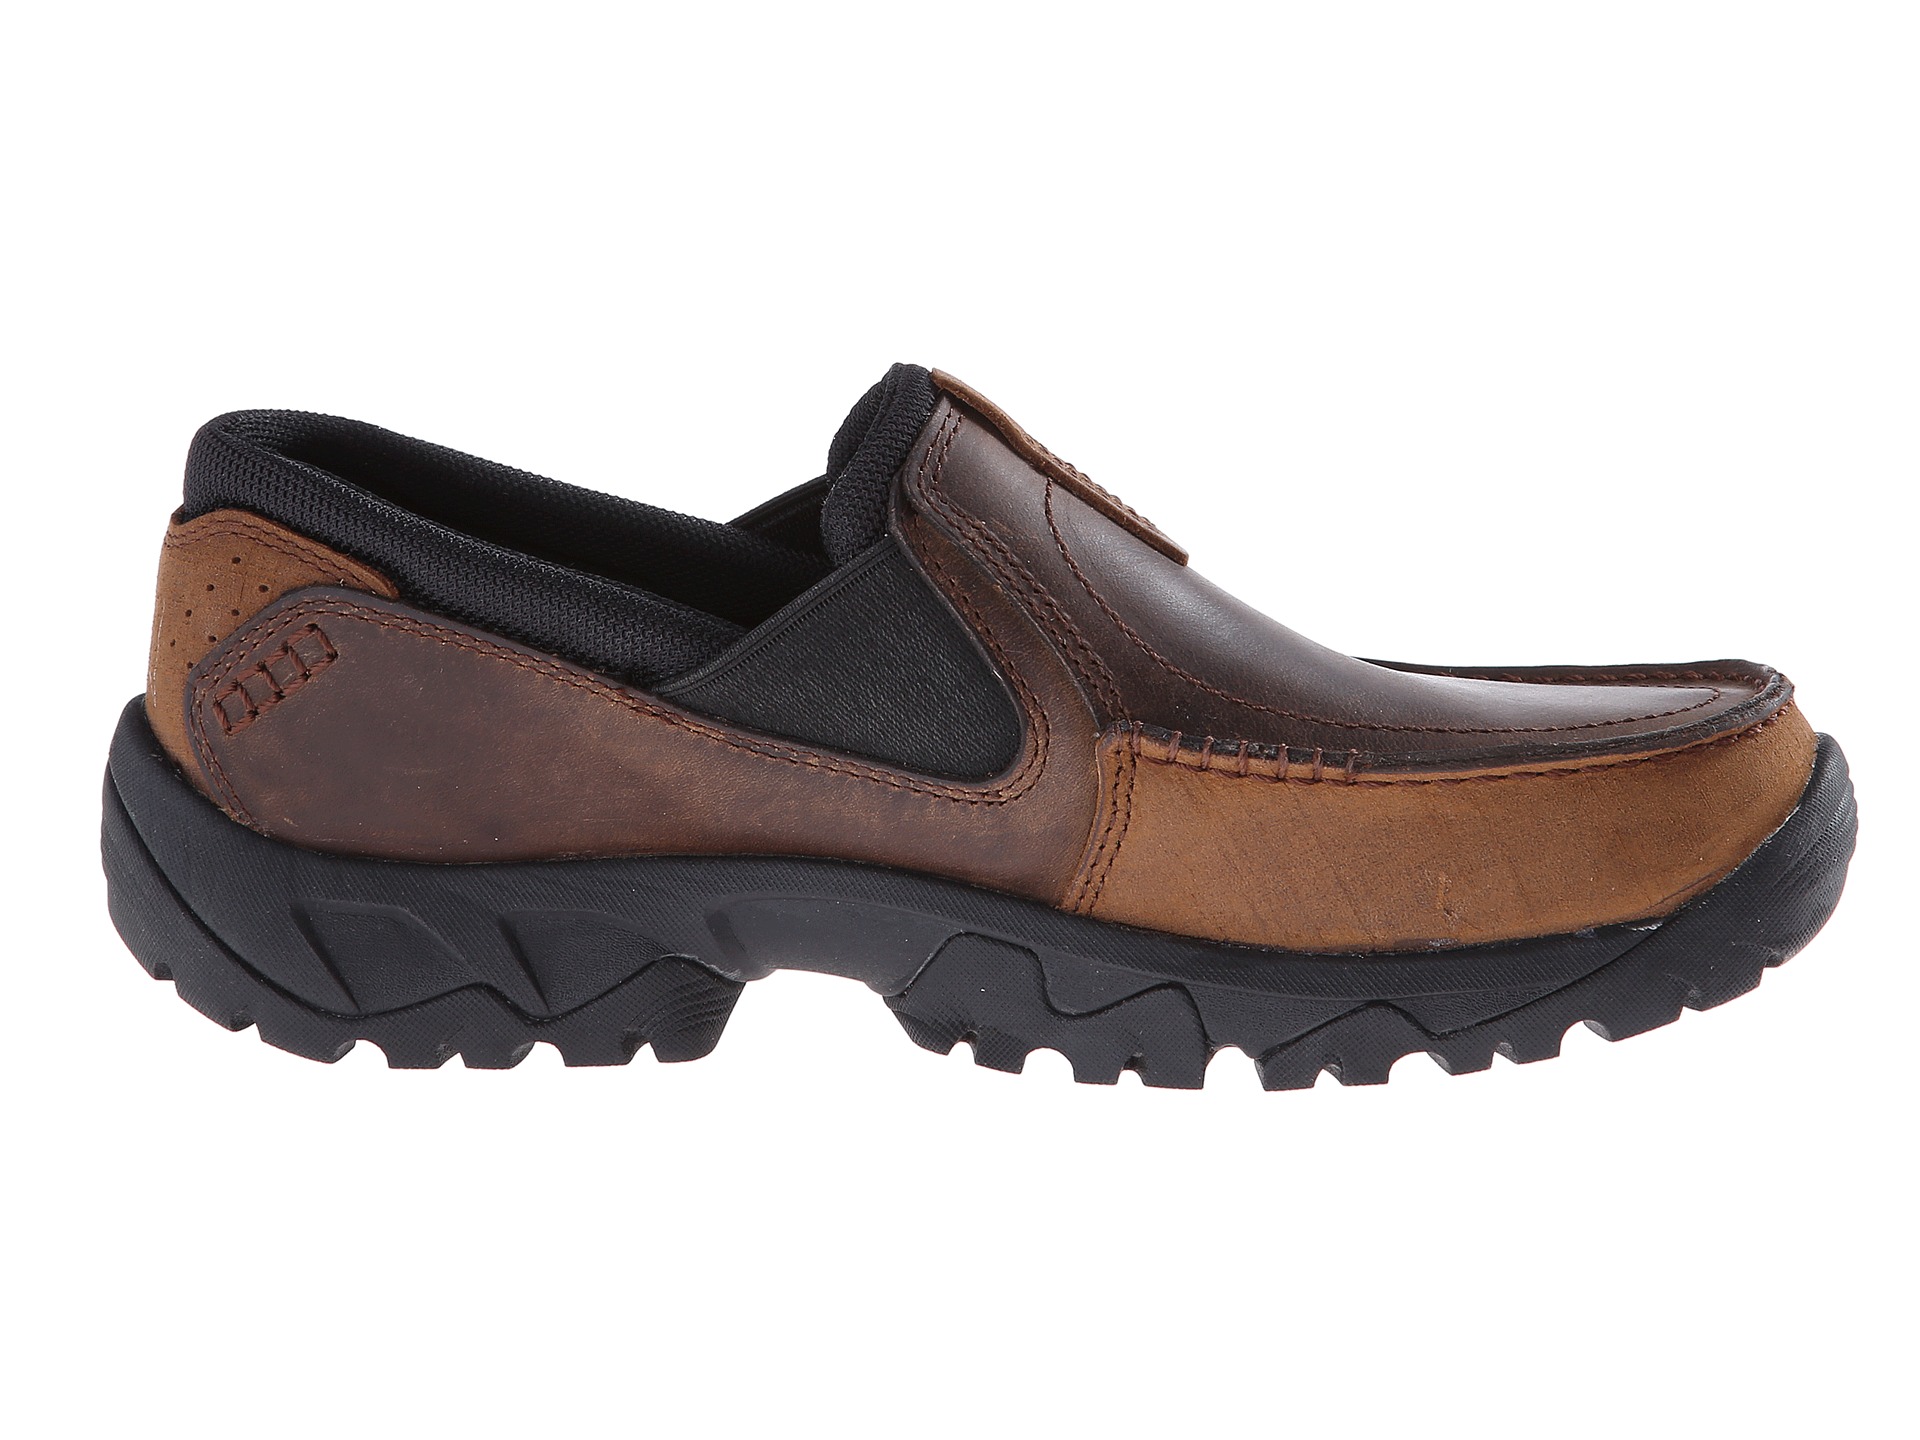 Timberland Earthkeepers Crawley Slip On Dark Brown | Shipped Free at Zappos